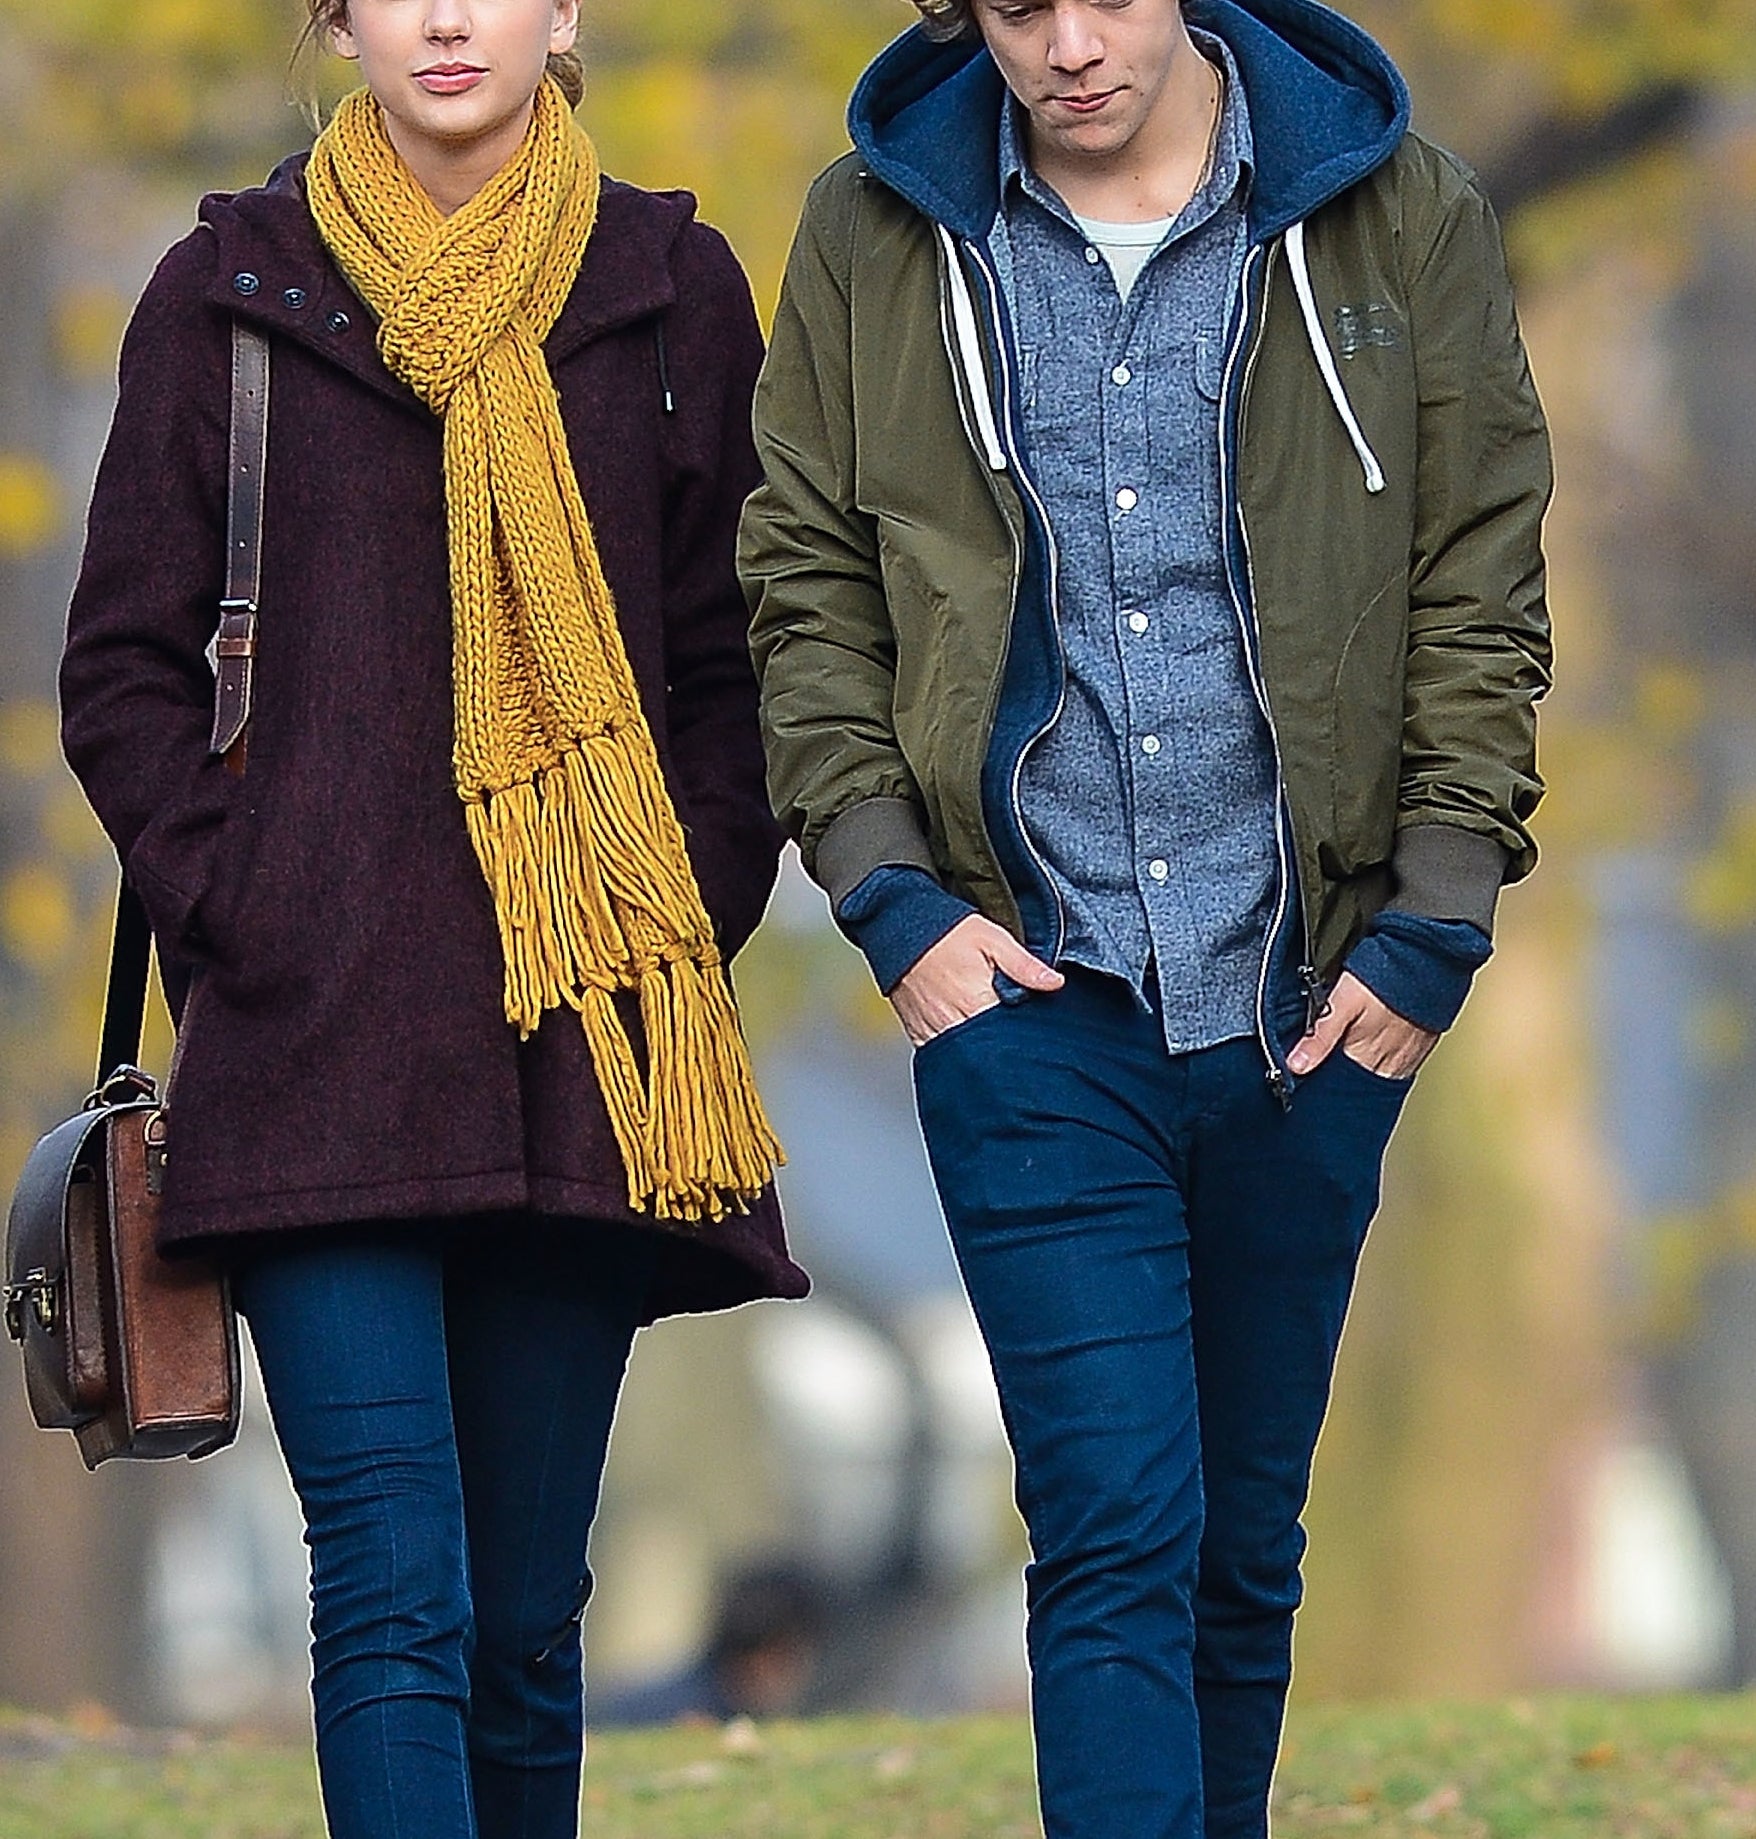 Taylor and Harry taking a walk together outside during colder months